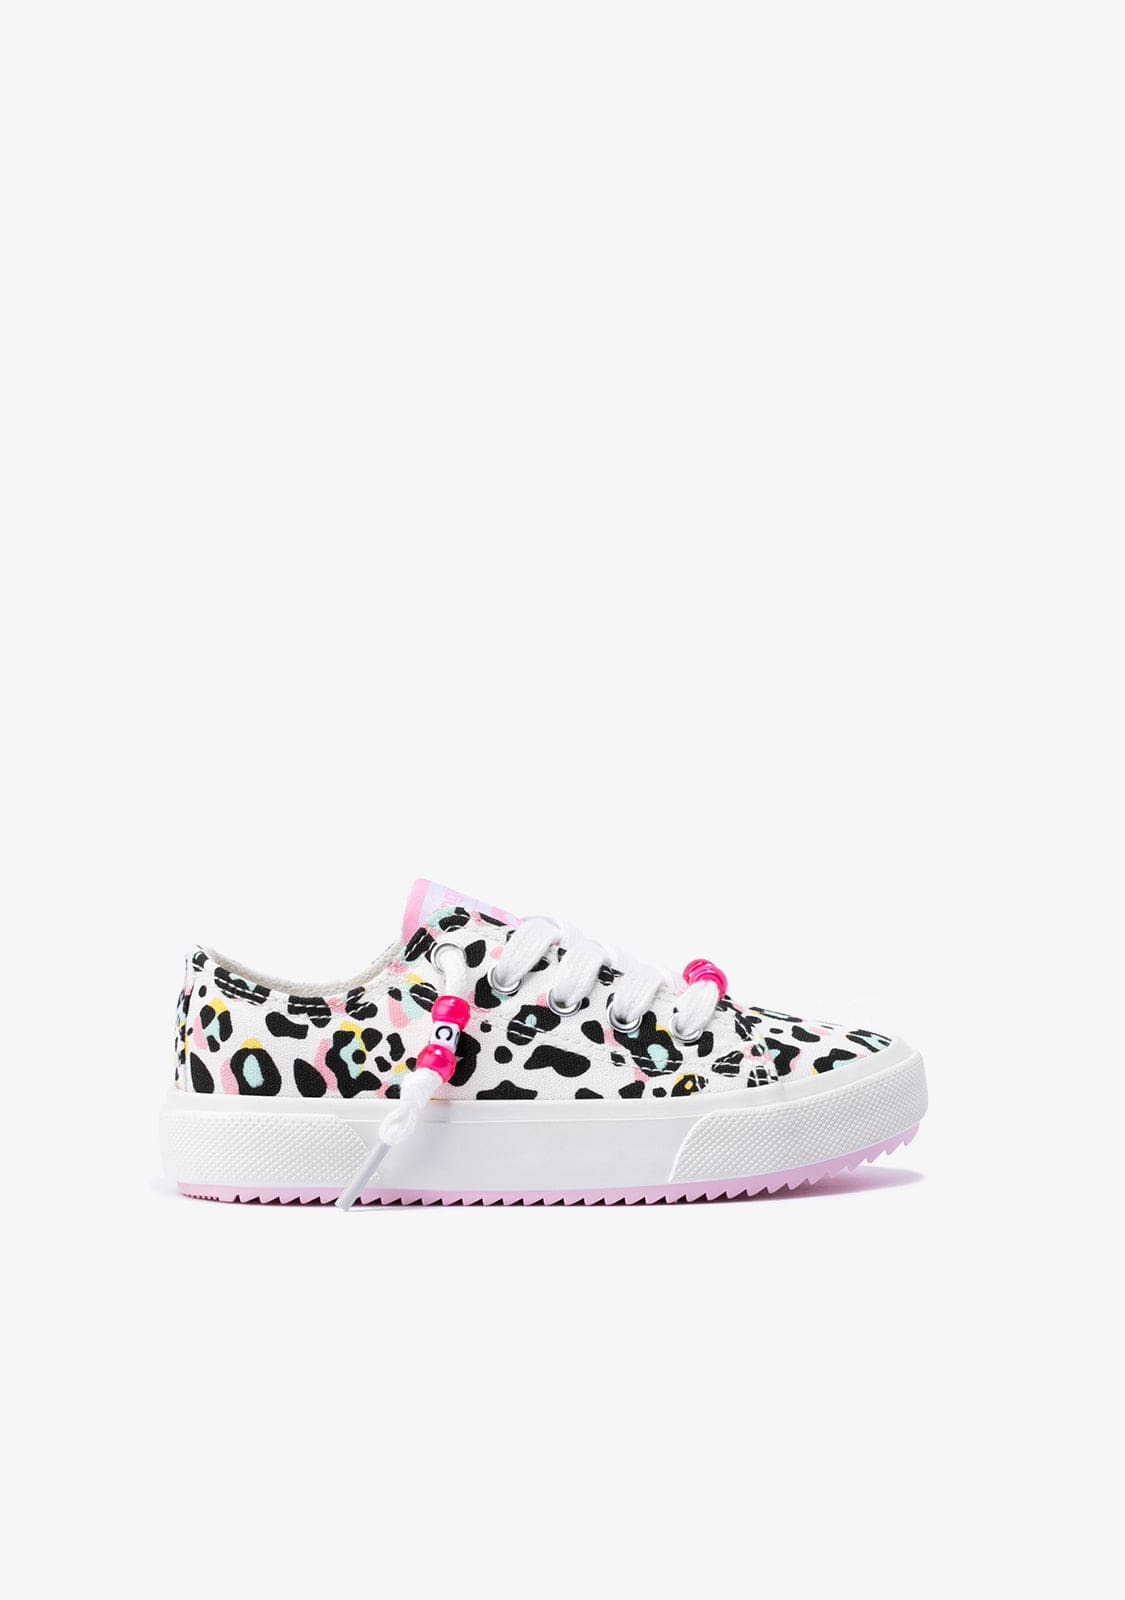 CONGUITOS Shoes Girl's Leopard Sneakers Canvas